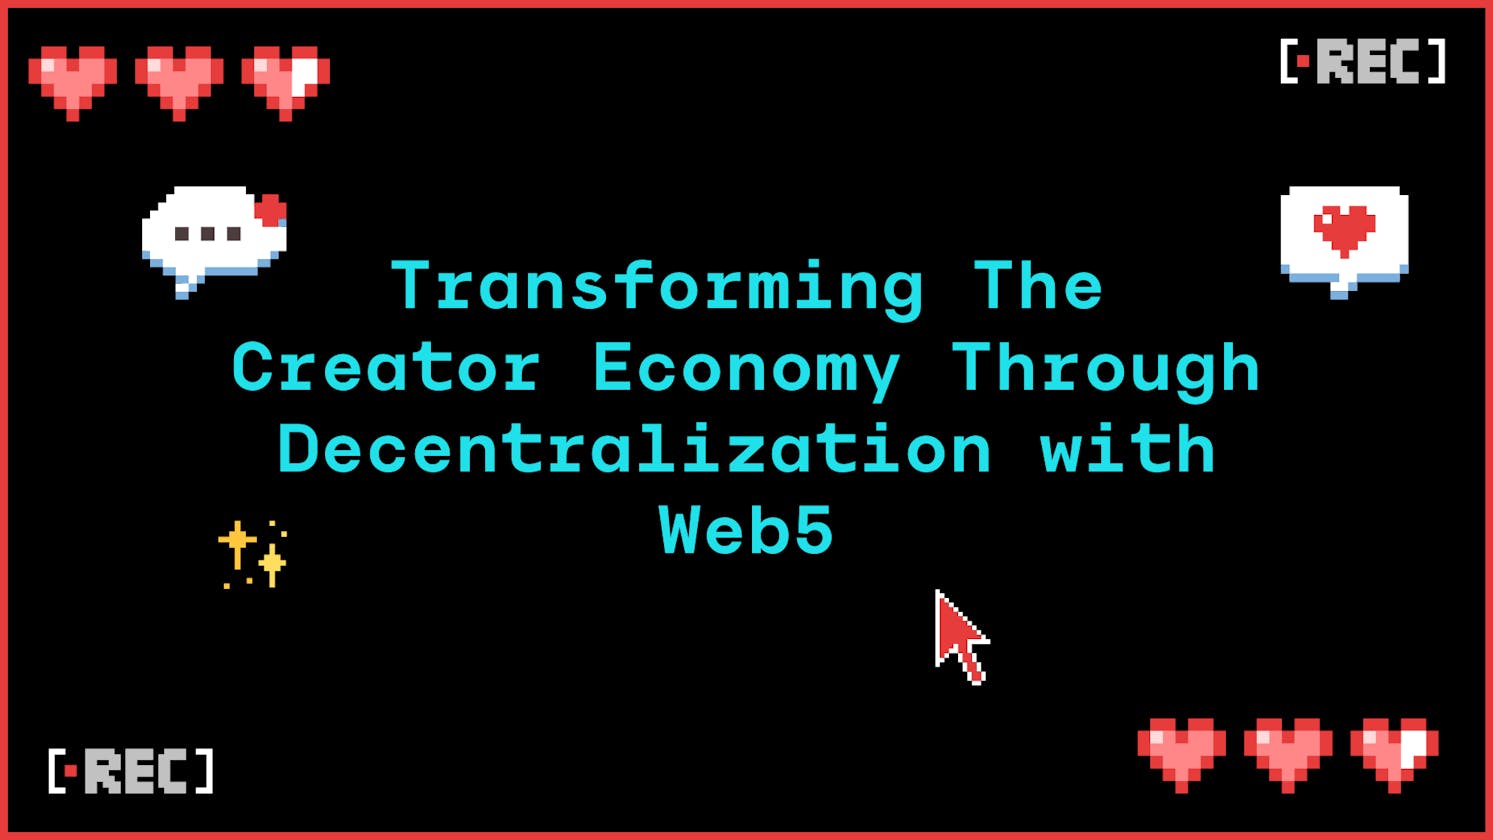 Transforming The Creator Economy Through Decentralization with Web5